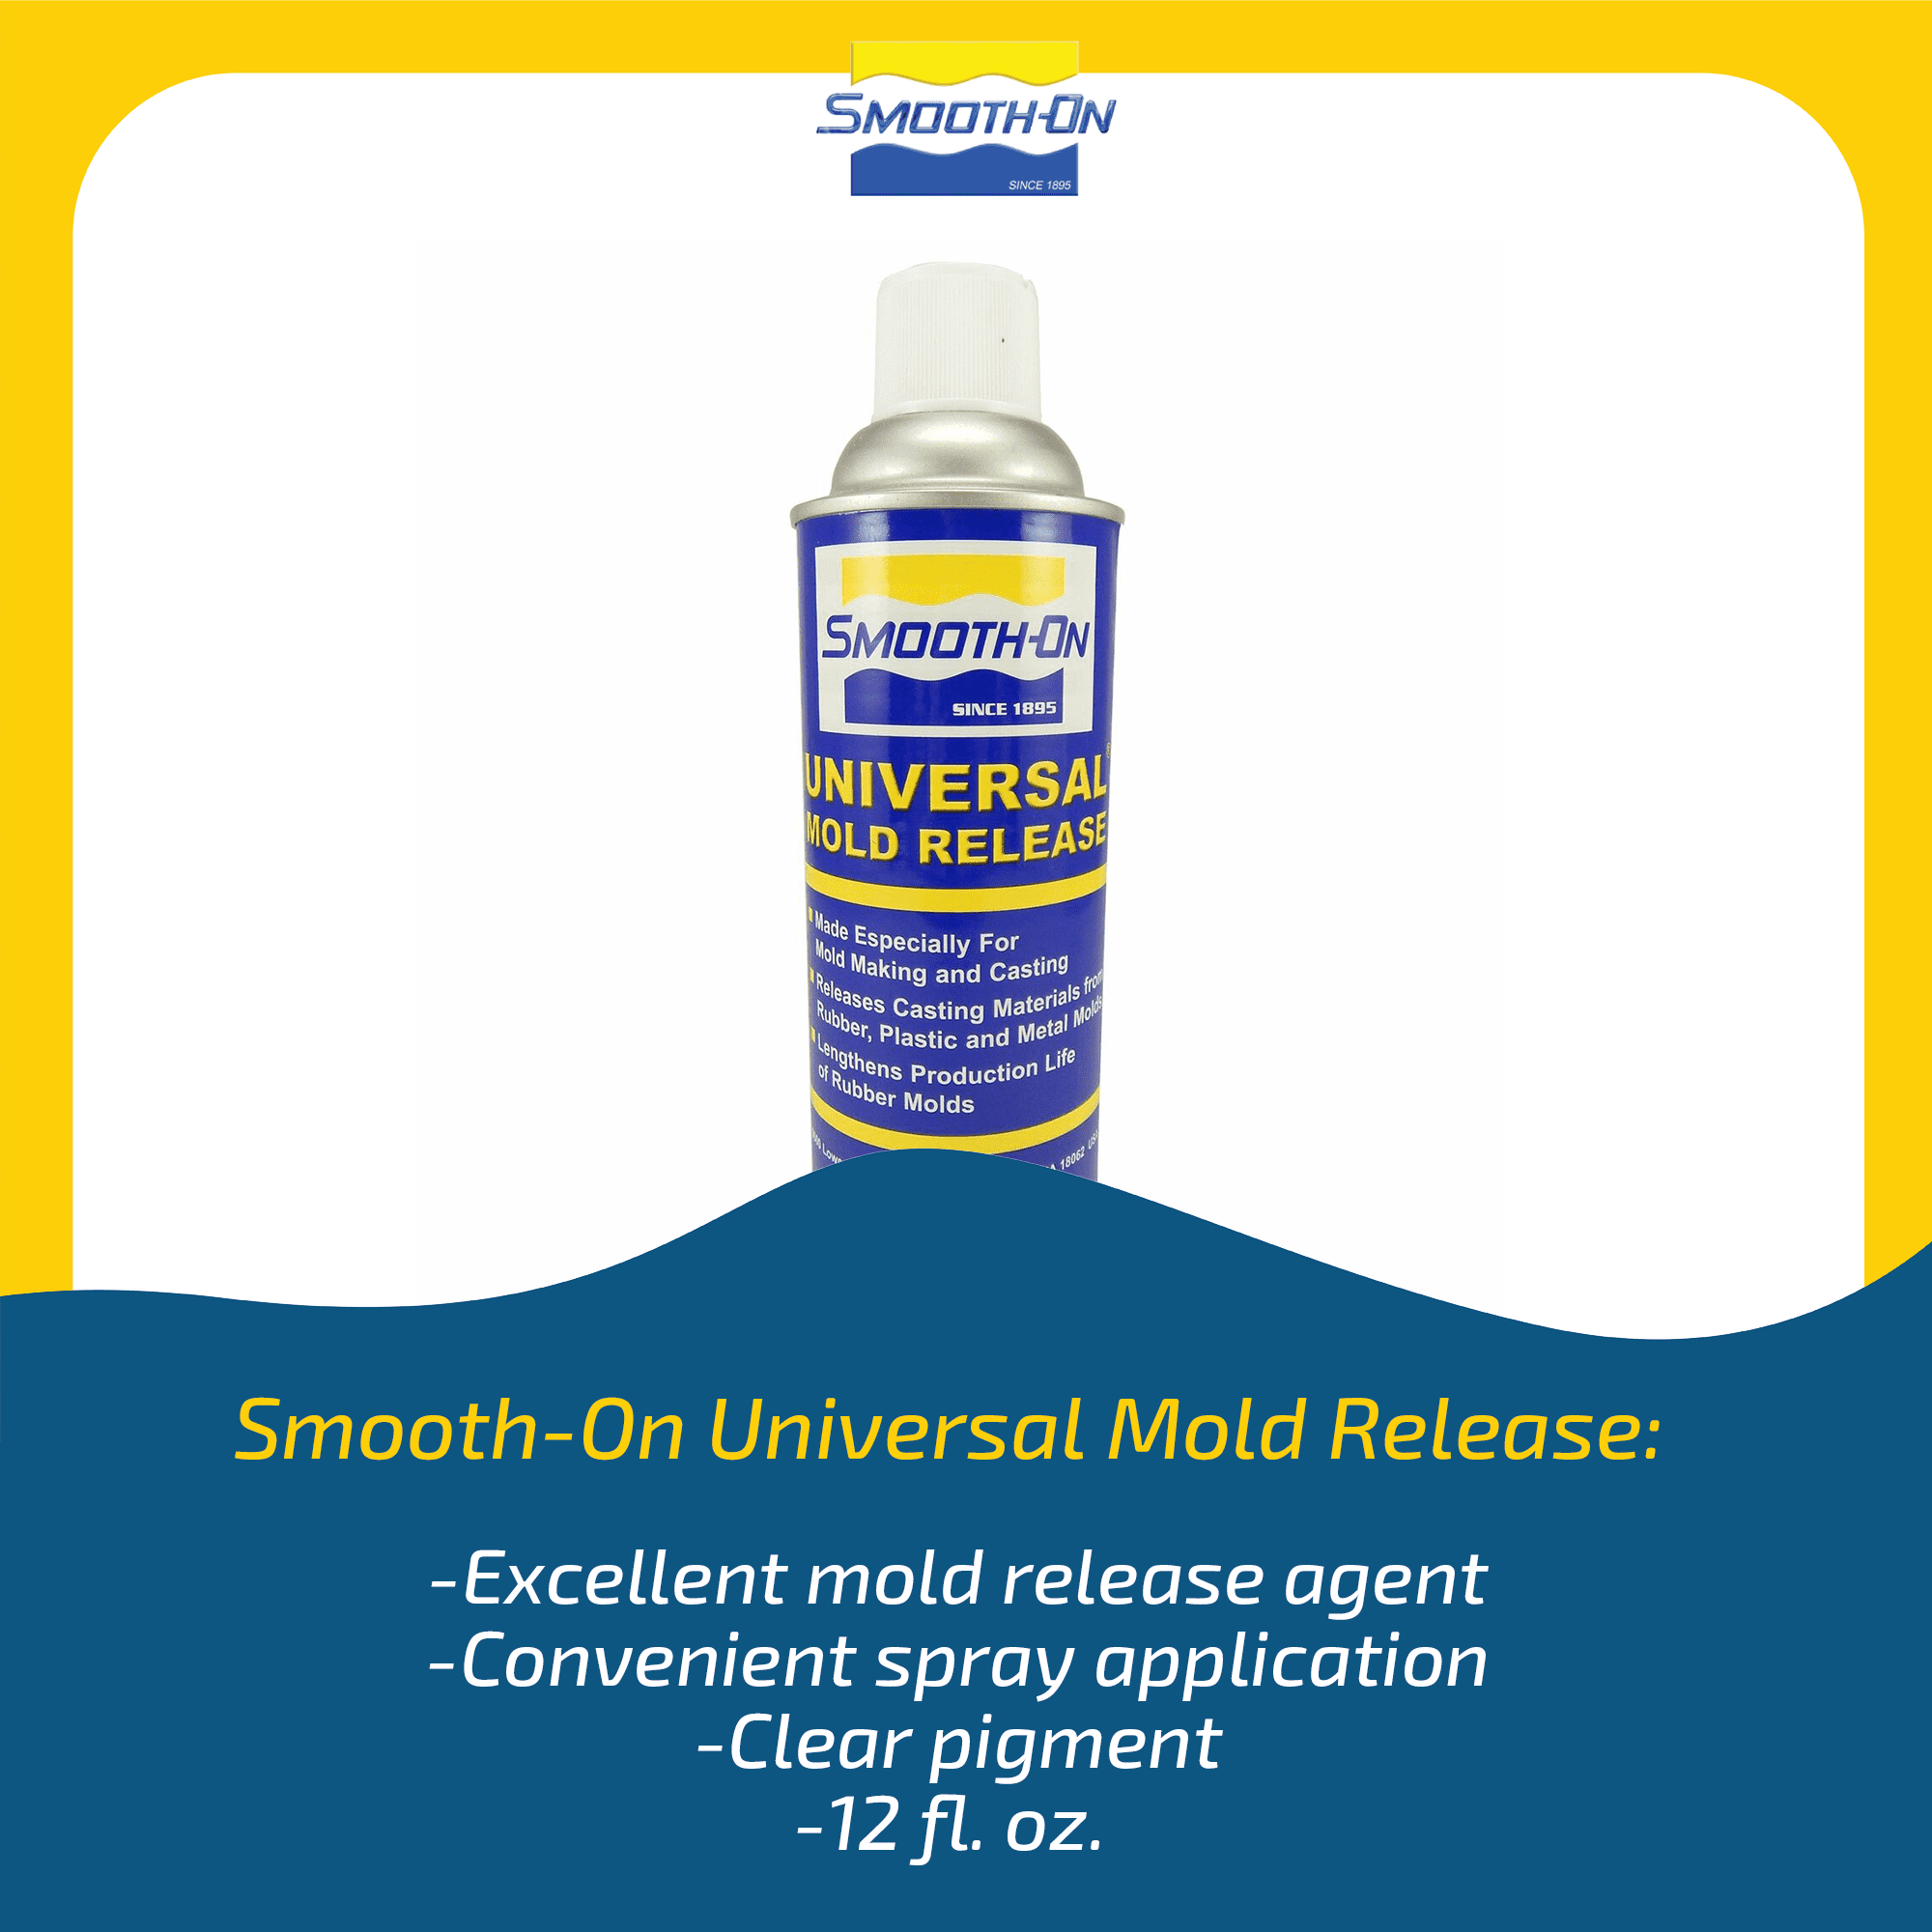 Using Smooth-On Universal Mold release! 